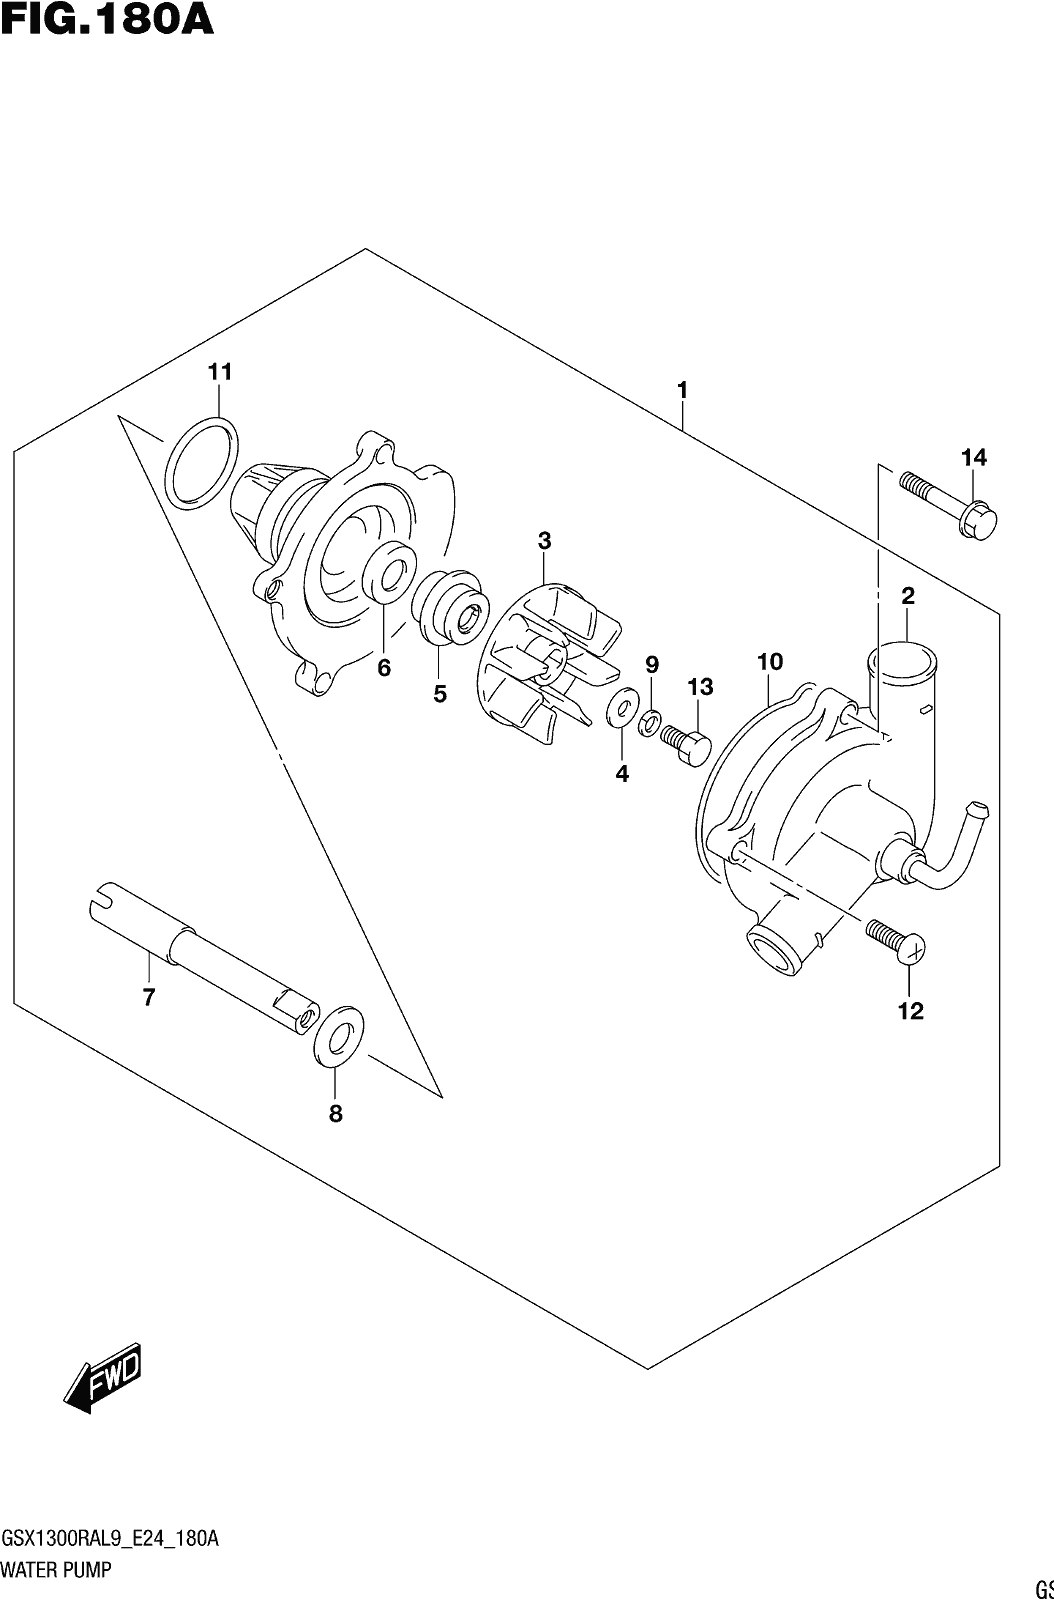 Fig.180a Water Pump